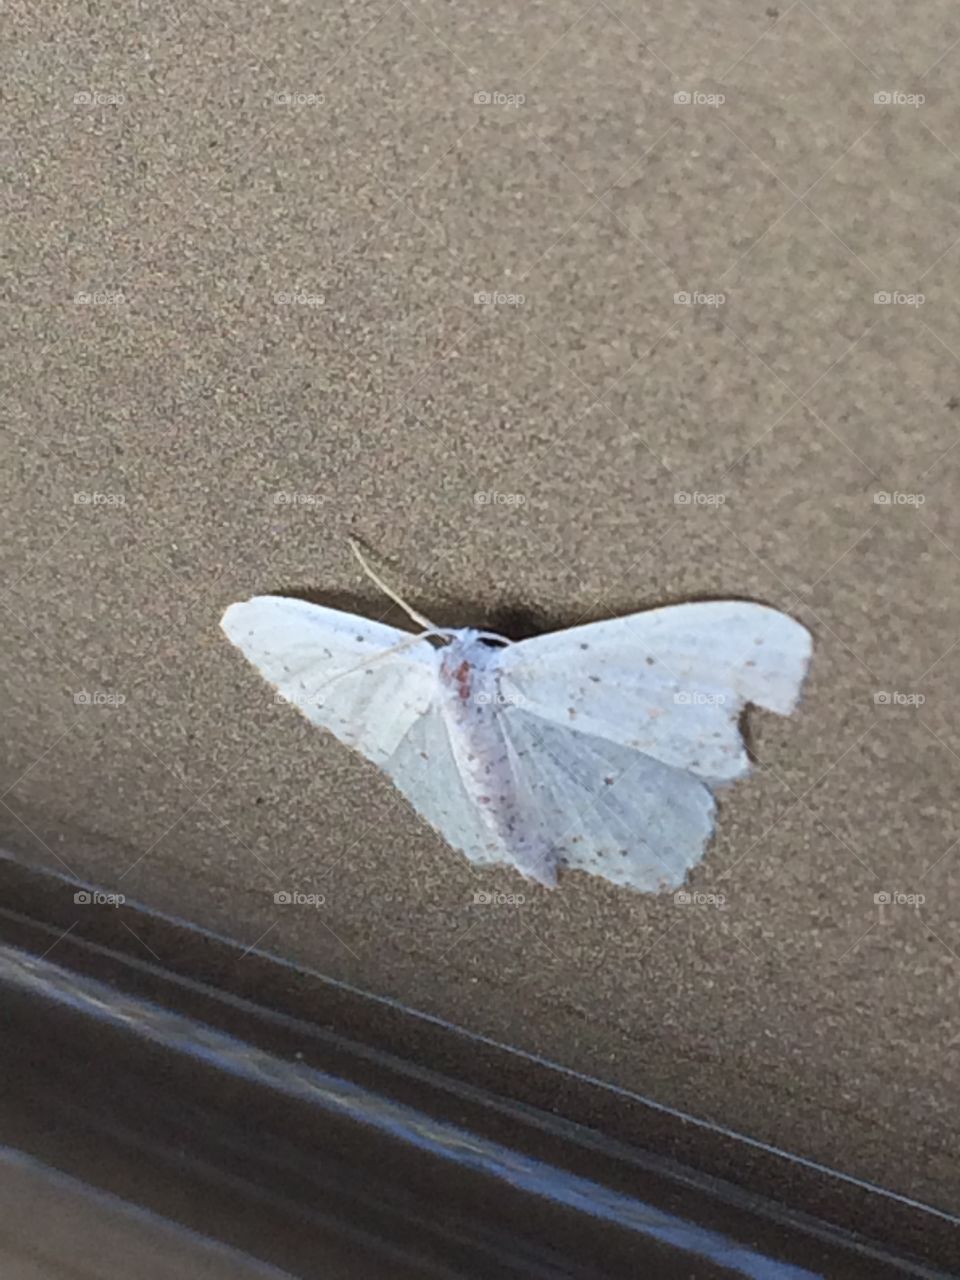 Moth on the tailgate